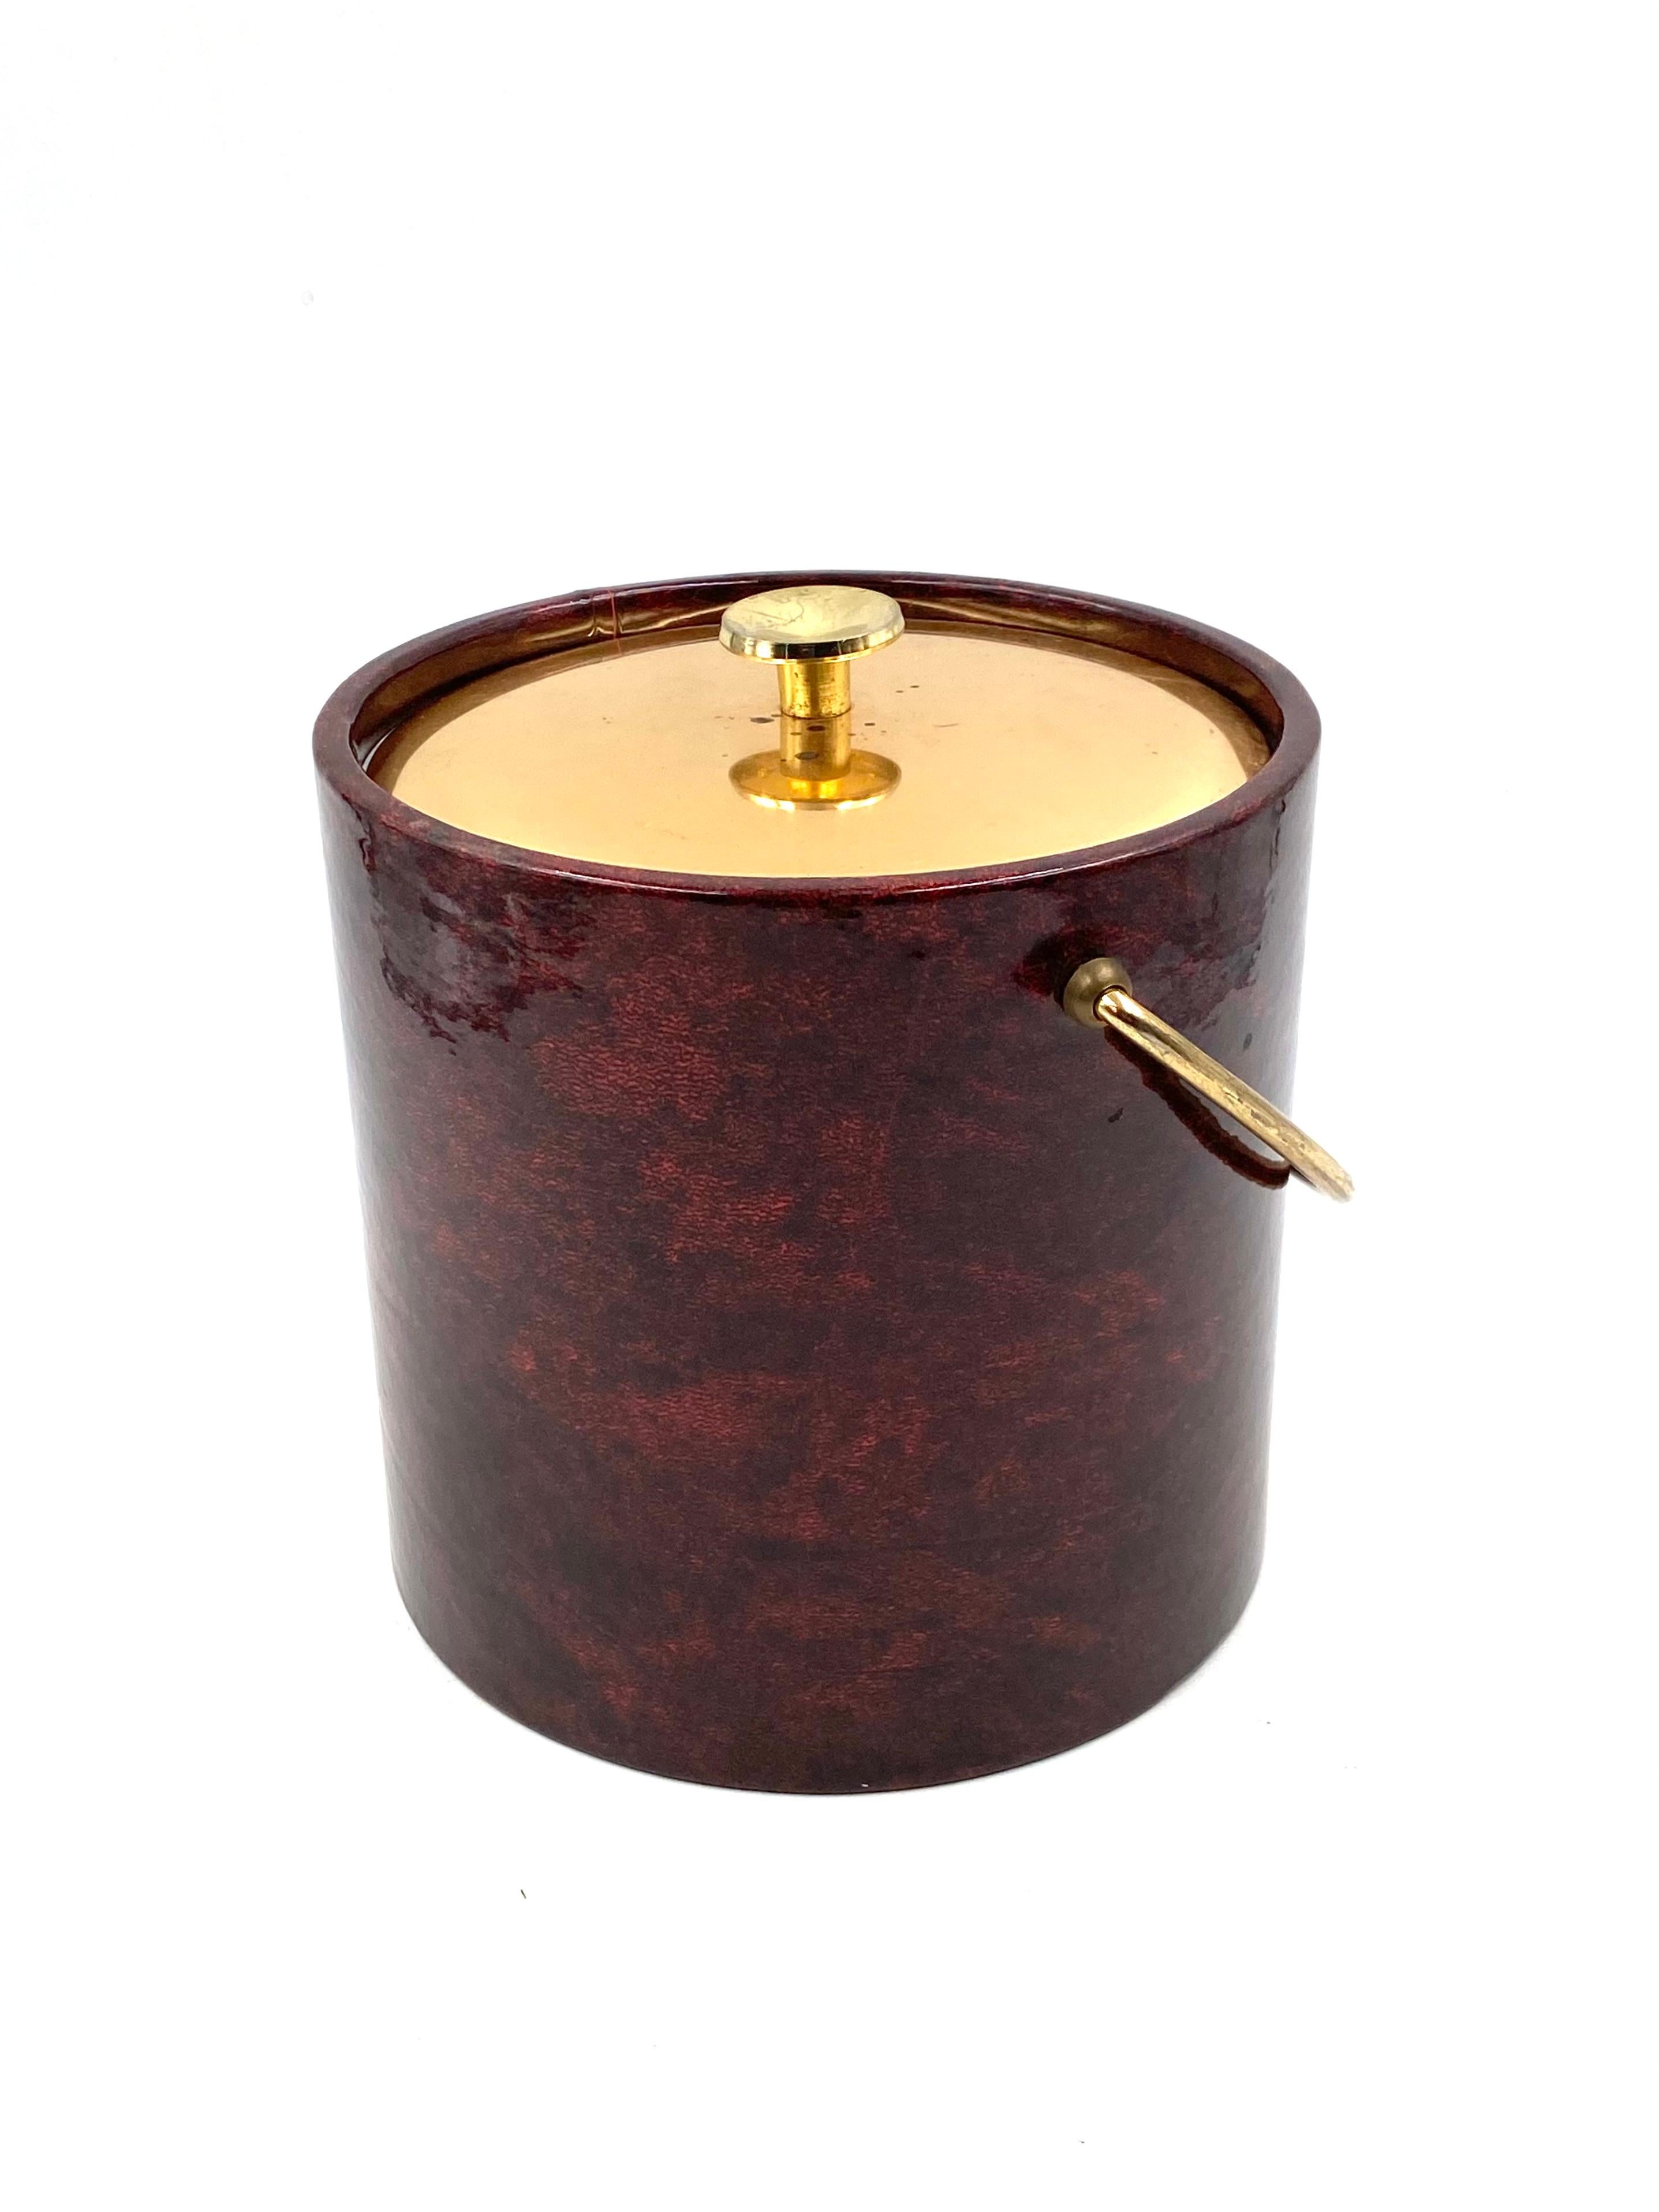 Aldo Tura, Brass and red Parchment cooler / Ice bucket, Italy 1960s For Sale 8